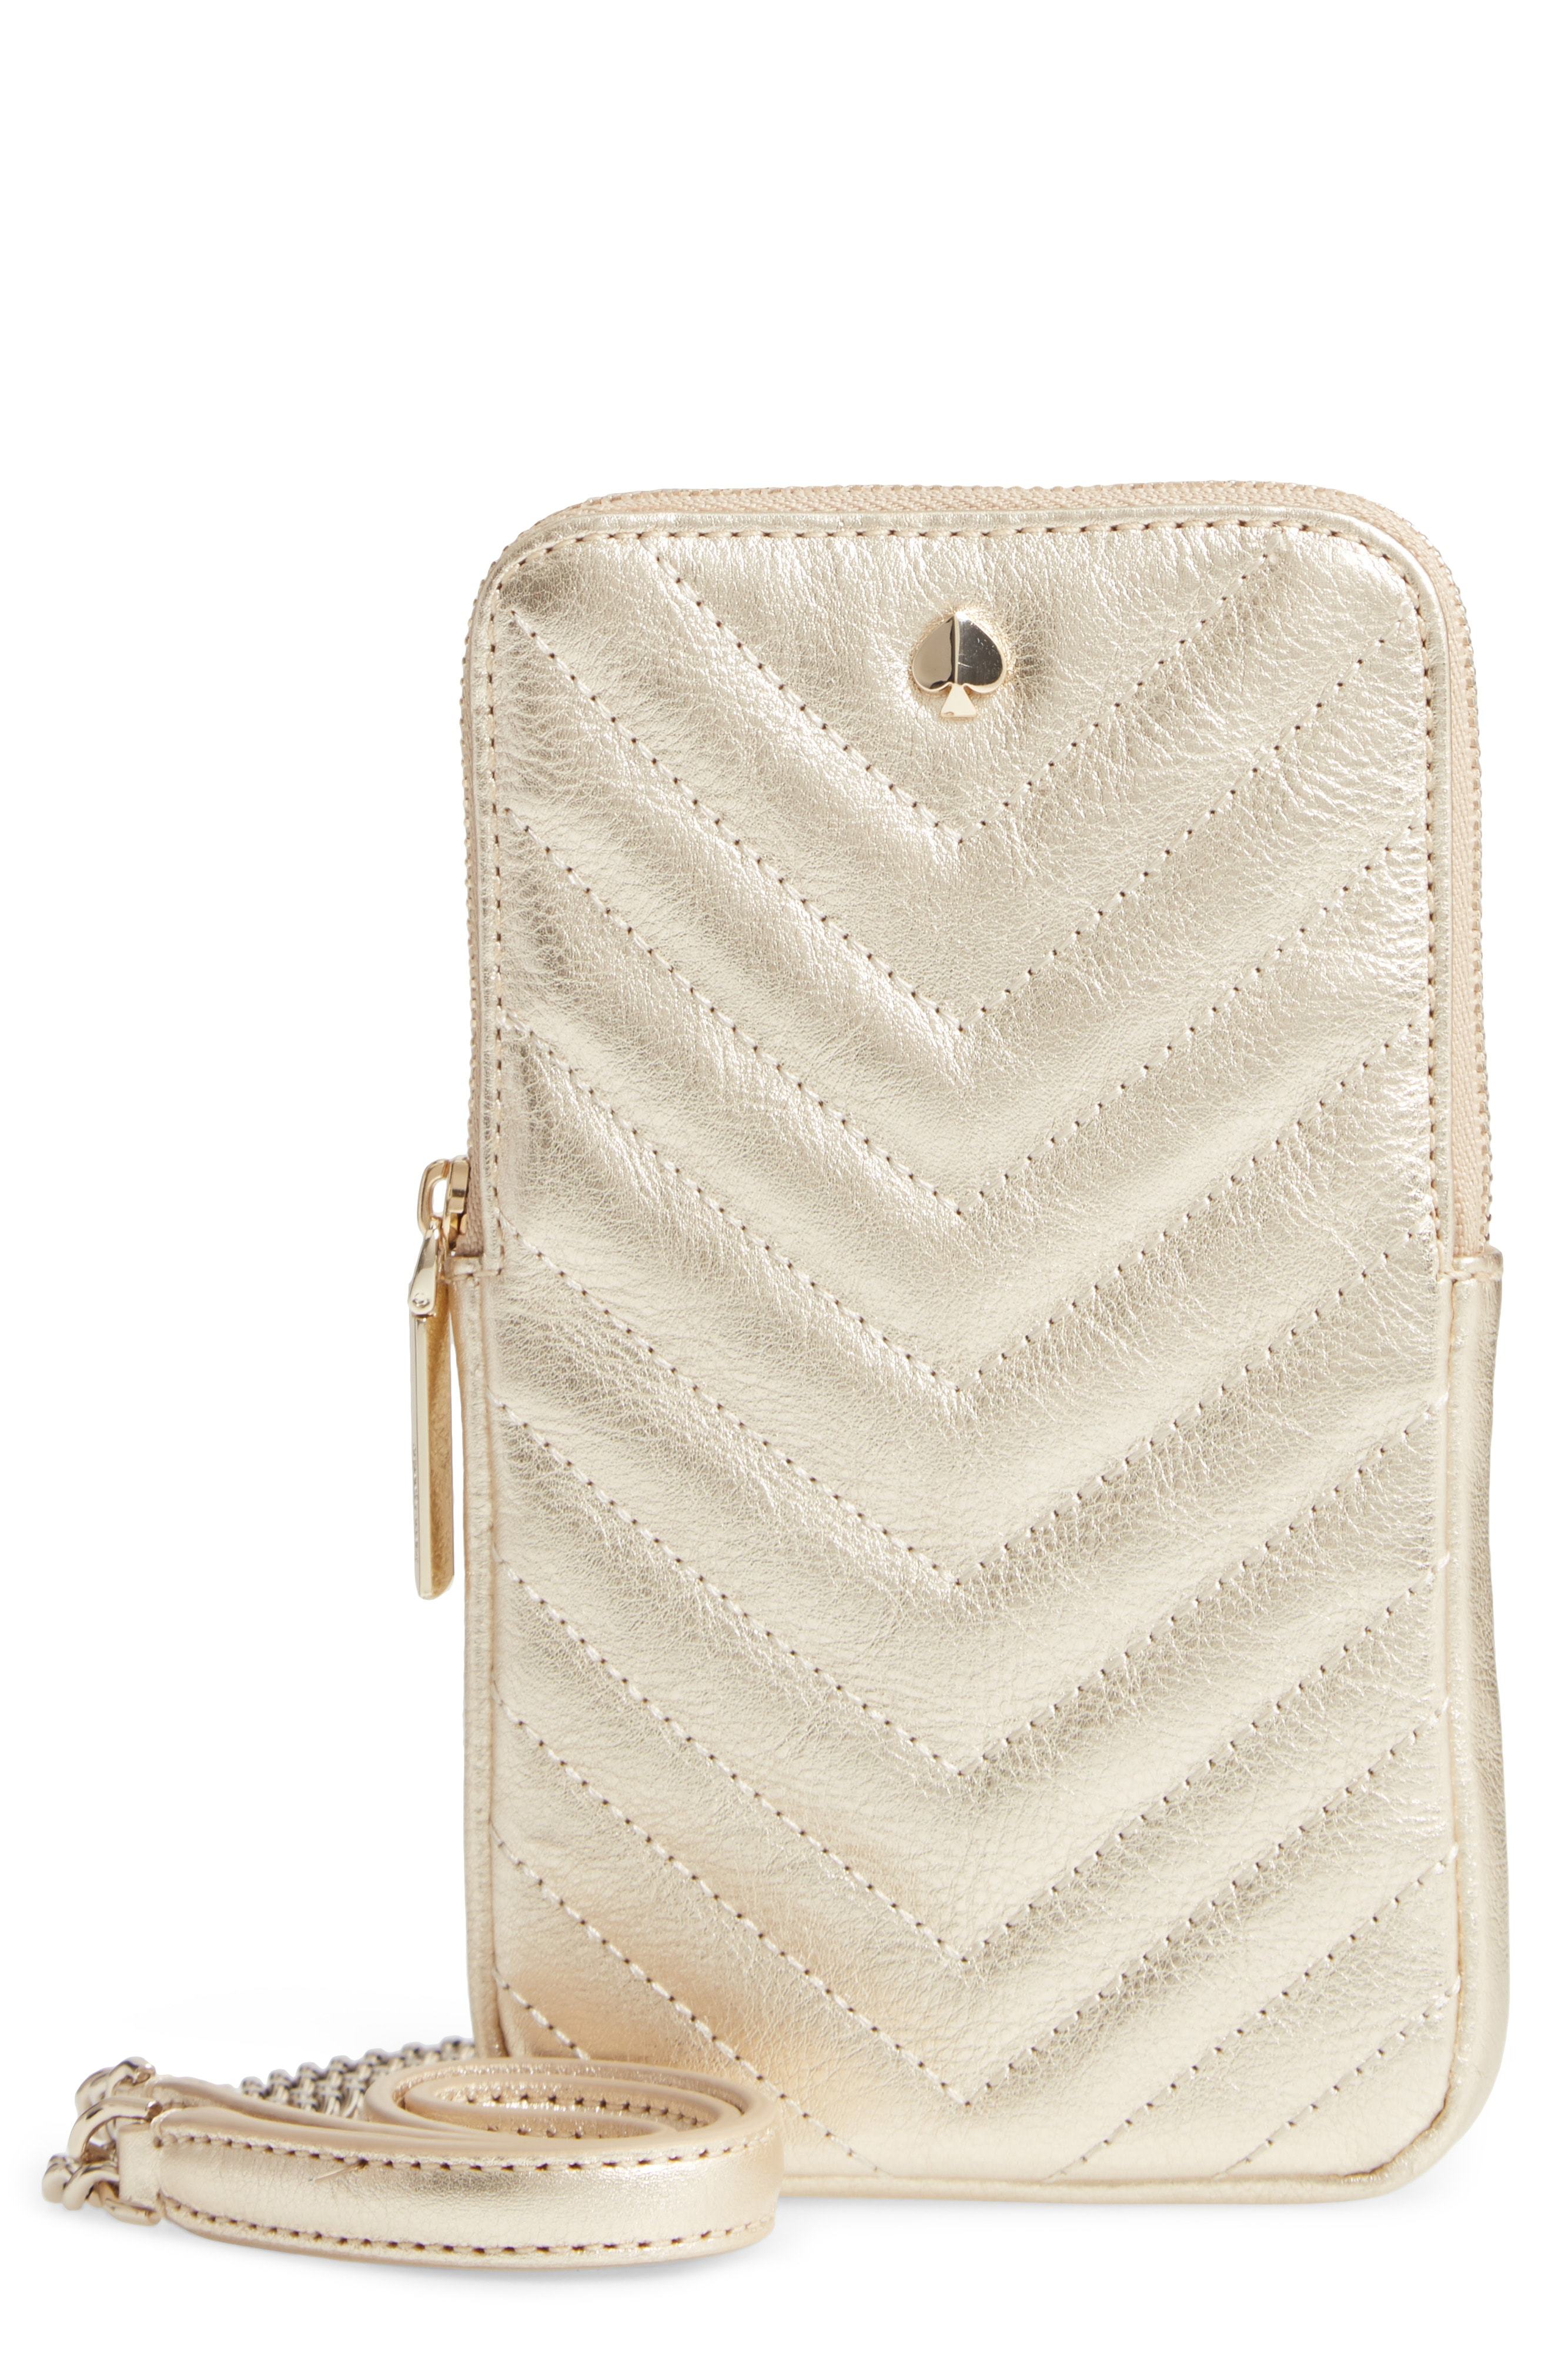 kate spade new york Amelia Quilted Leather Phone Crossbody Bag, $88 |  Nordstrom | Lookastic